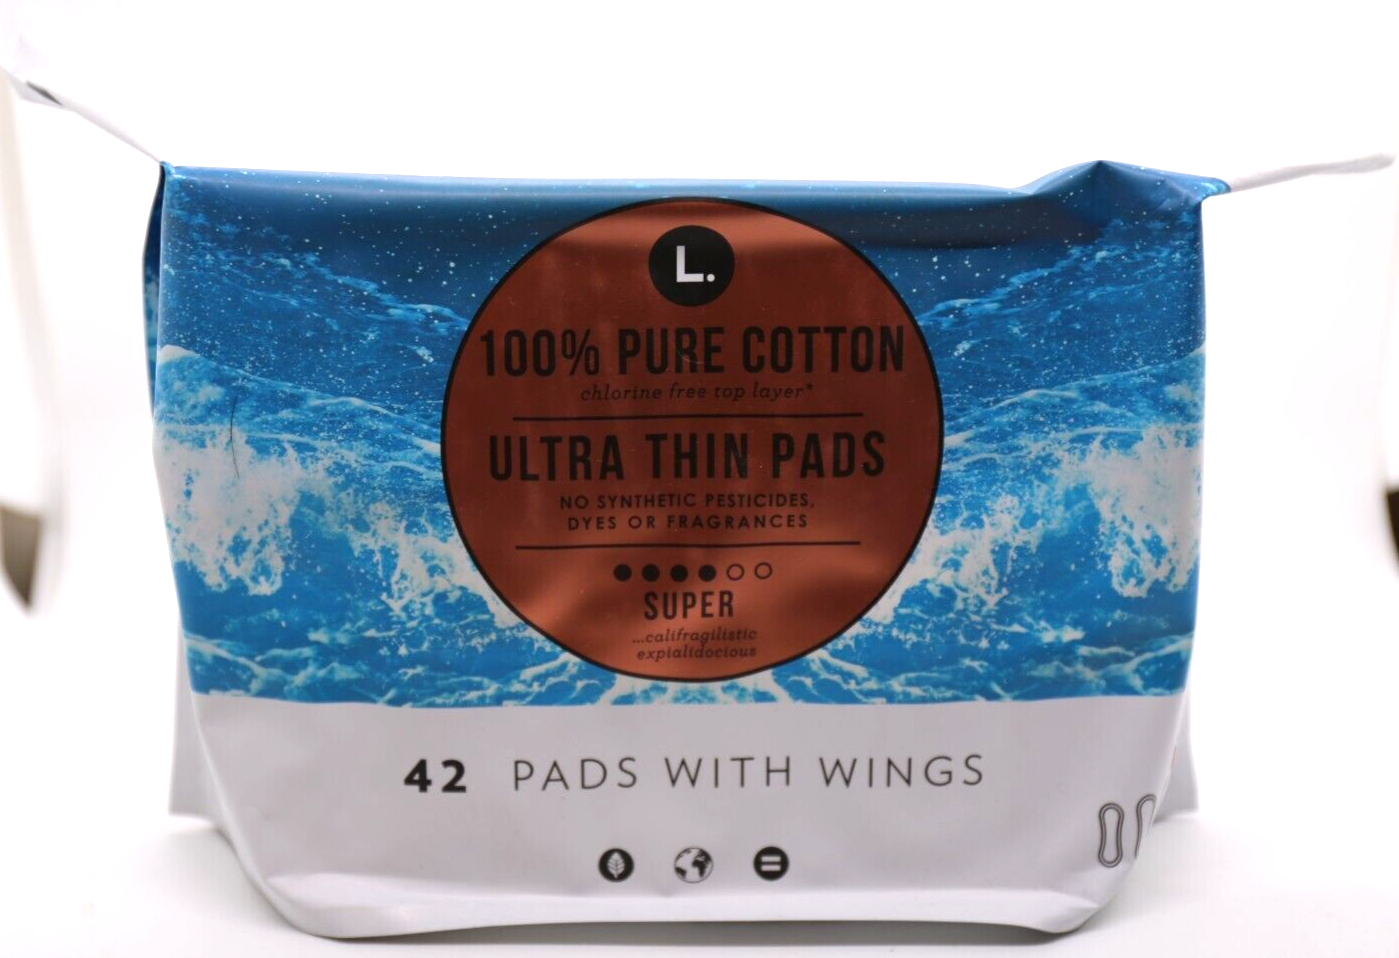 L. Chlorine Free Ultra Thin Pads with Wings